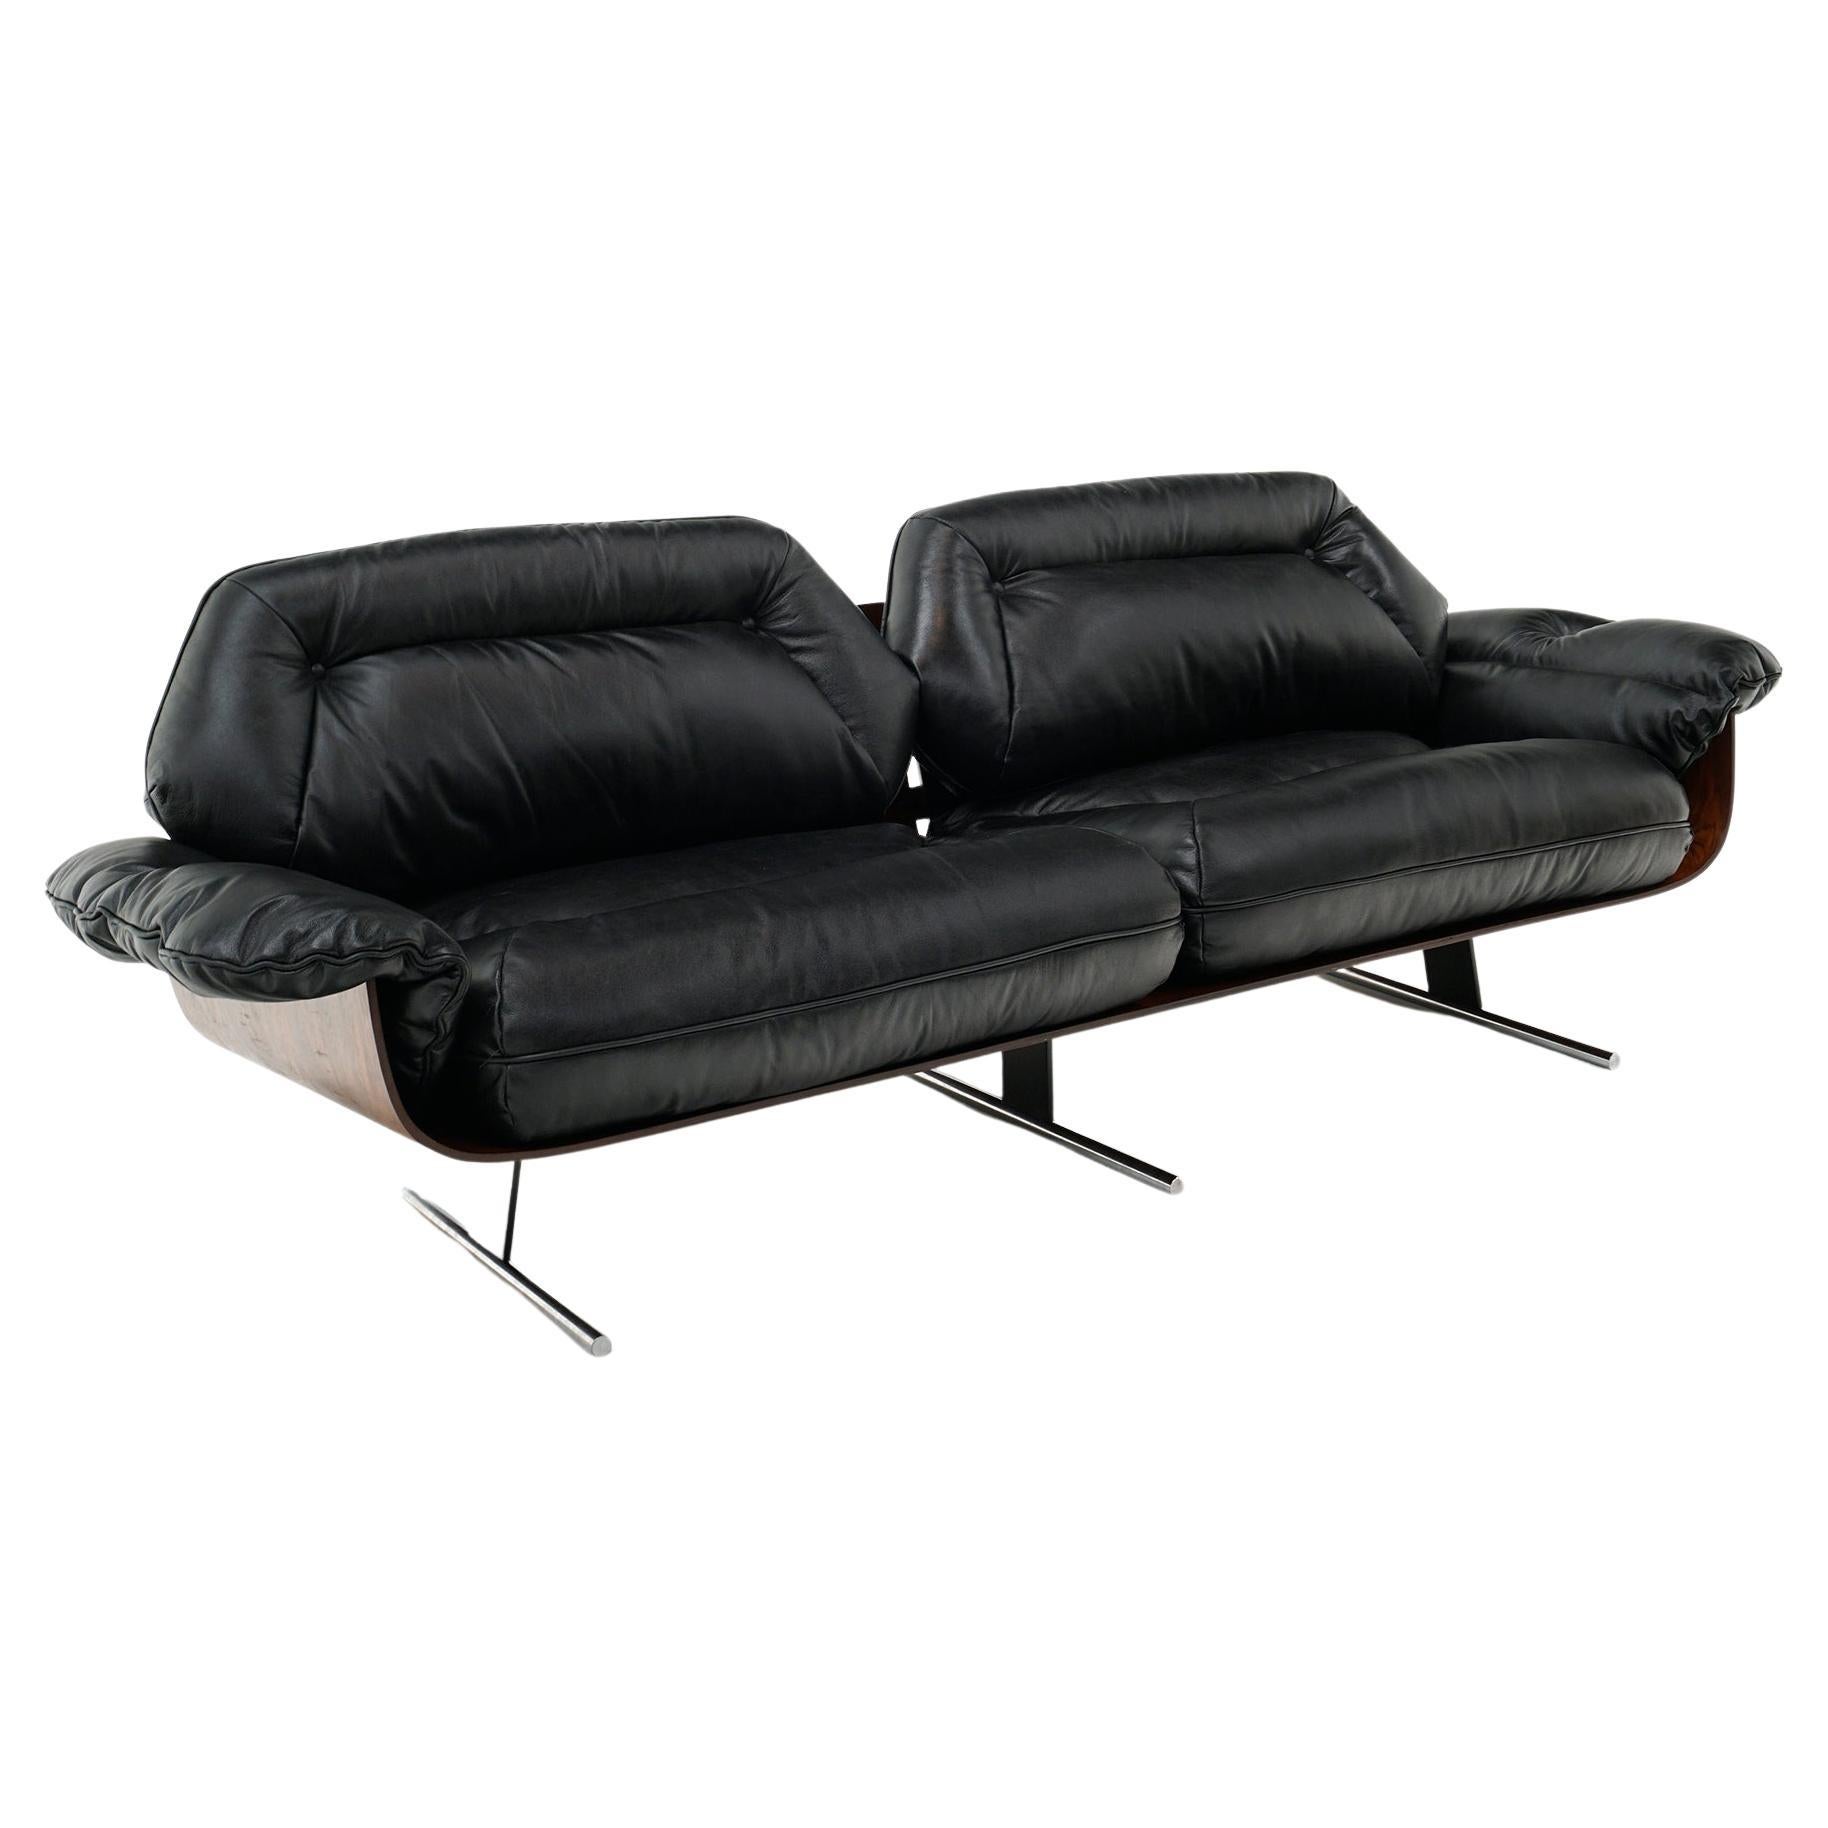 Jorge Zalszupin Sofa in Black Leather and Brazilian Rosewood. Great Condition.